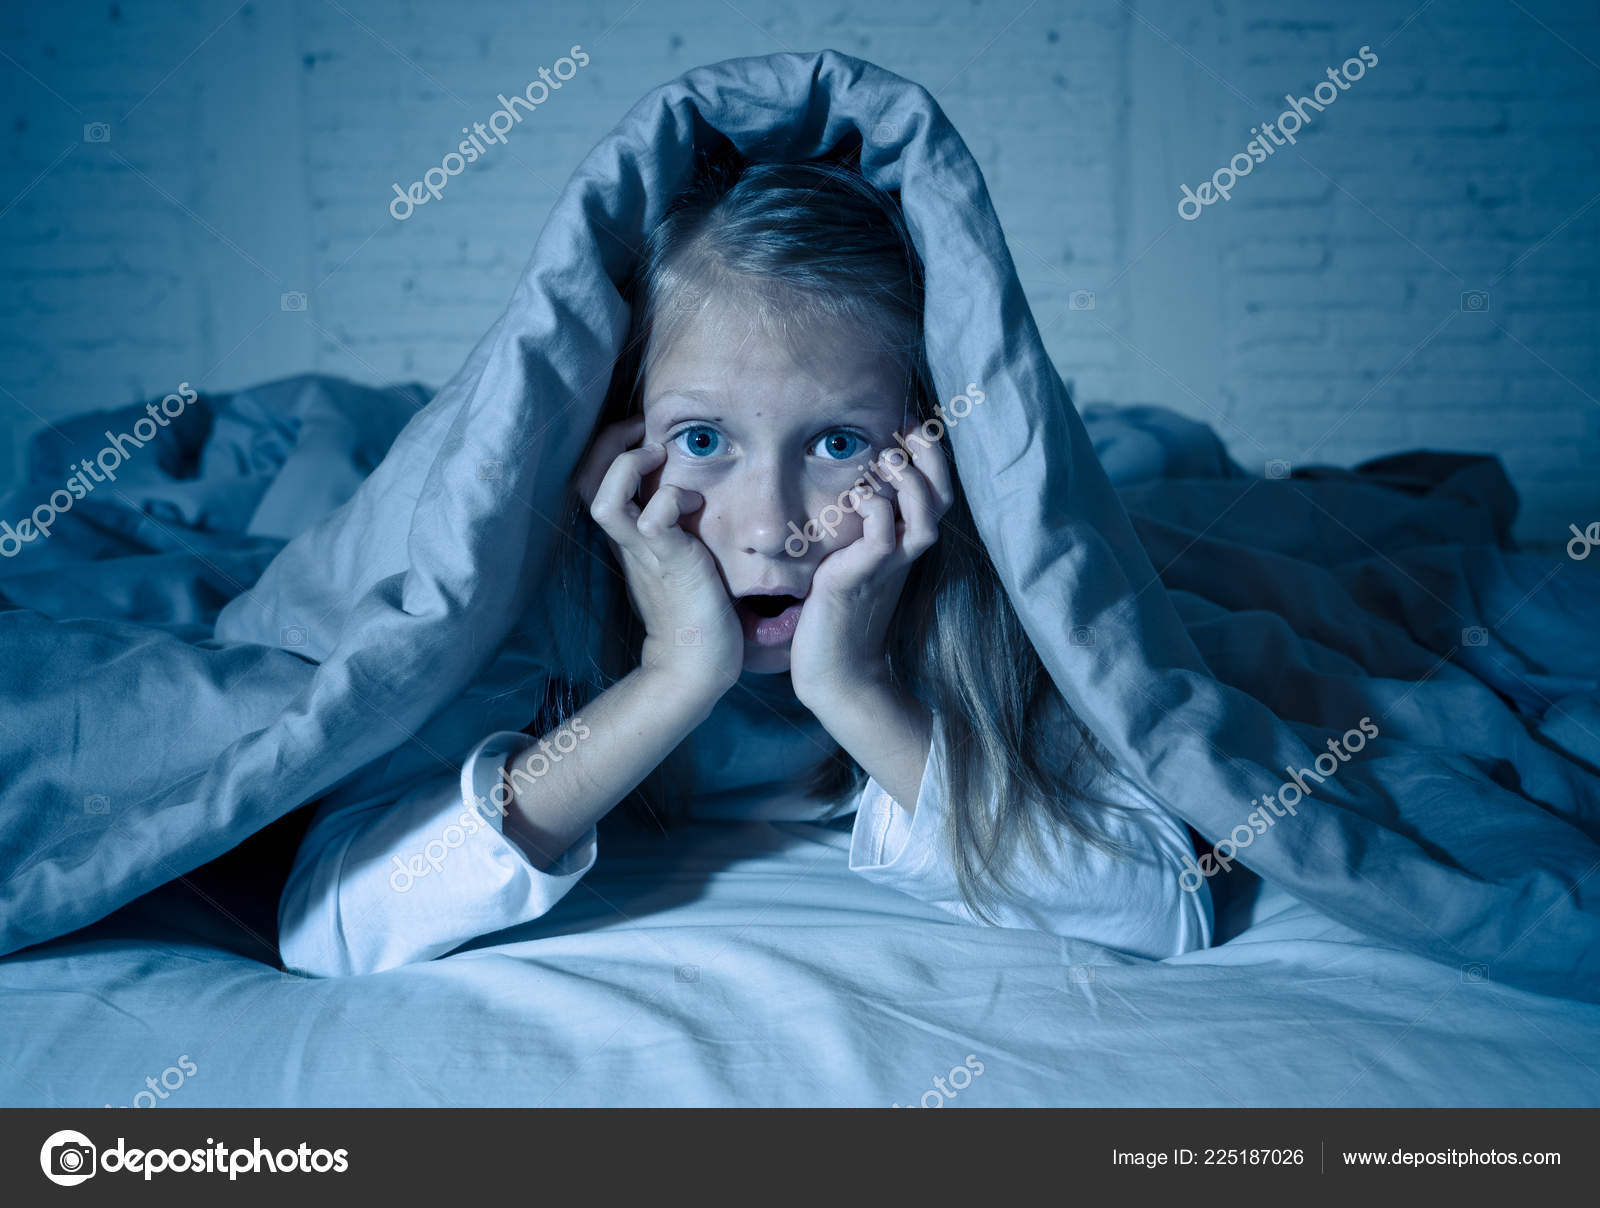 Cute Asleep Girl Screaming Crying Frightening Upsetting Dream Covering ...